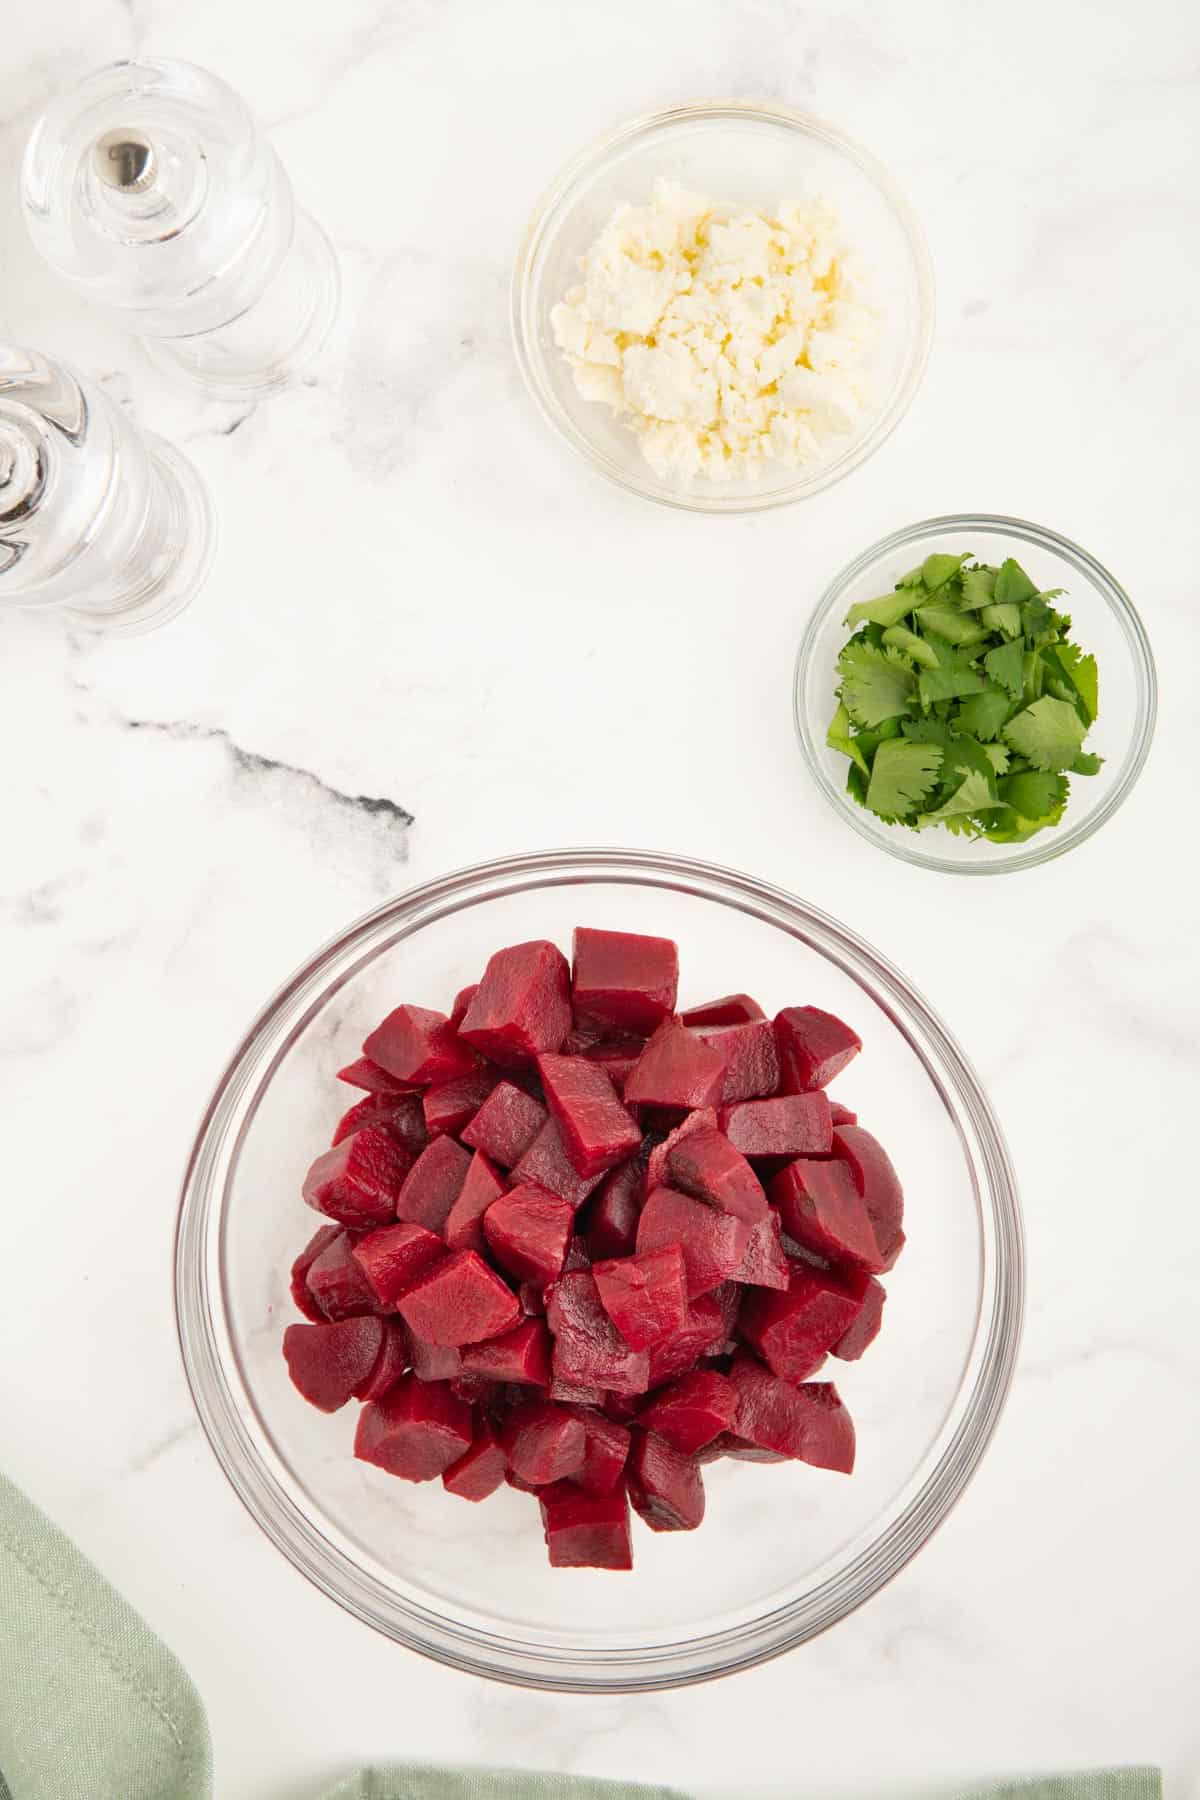 Beetroot, parsley, and feta in separate glass bowls.